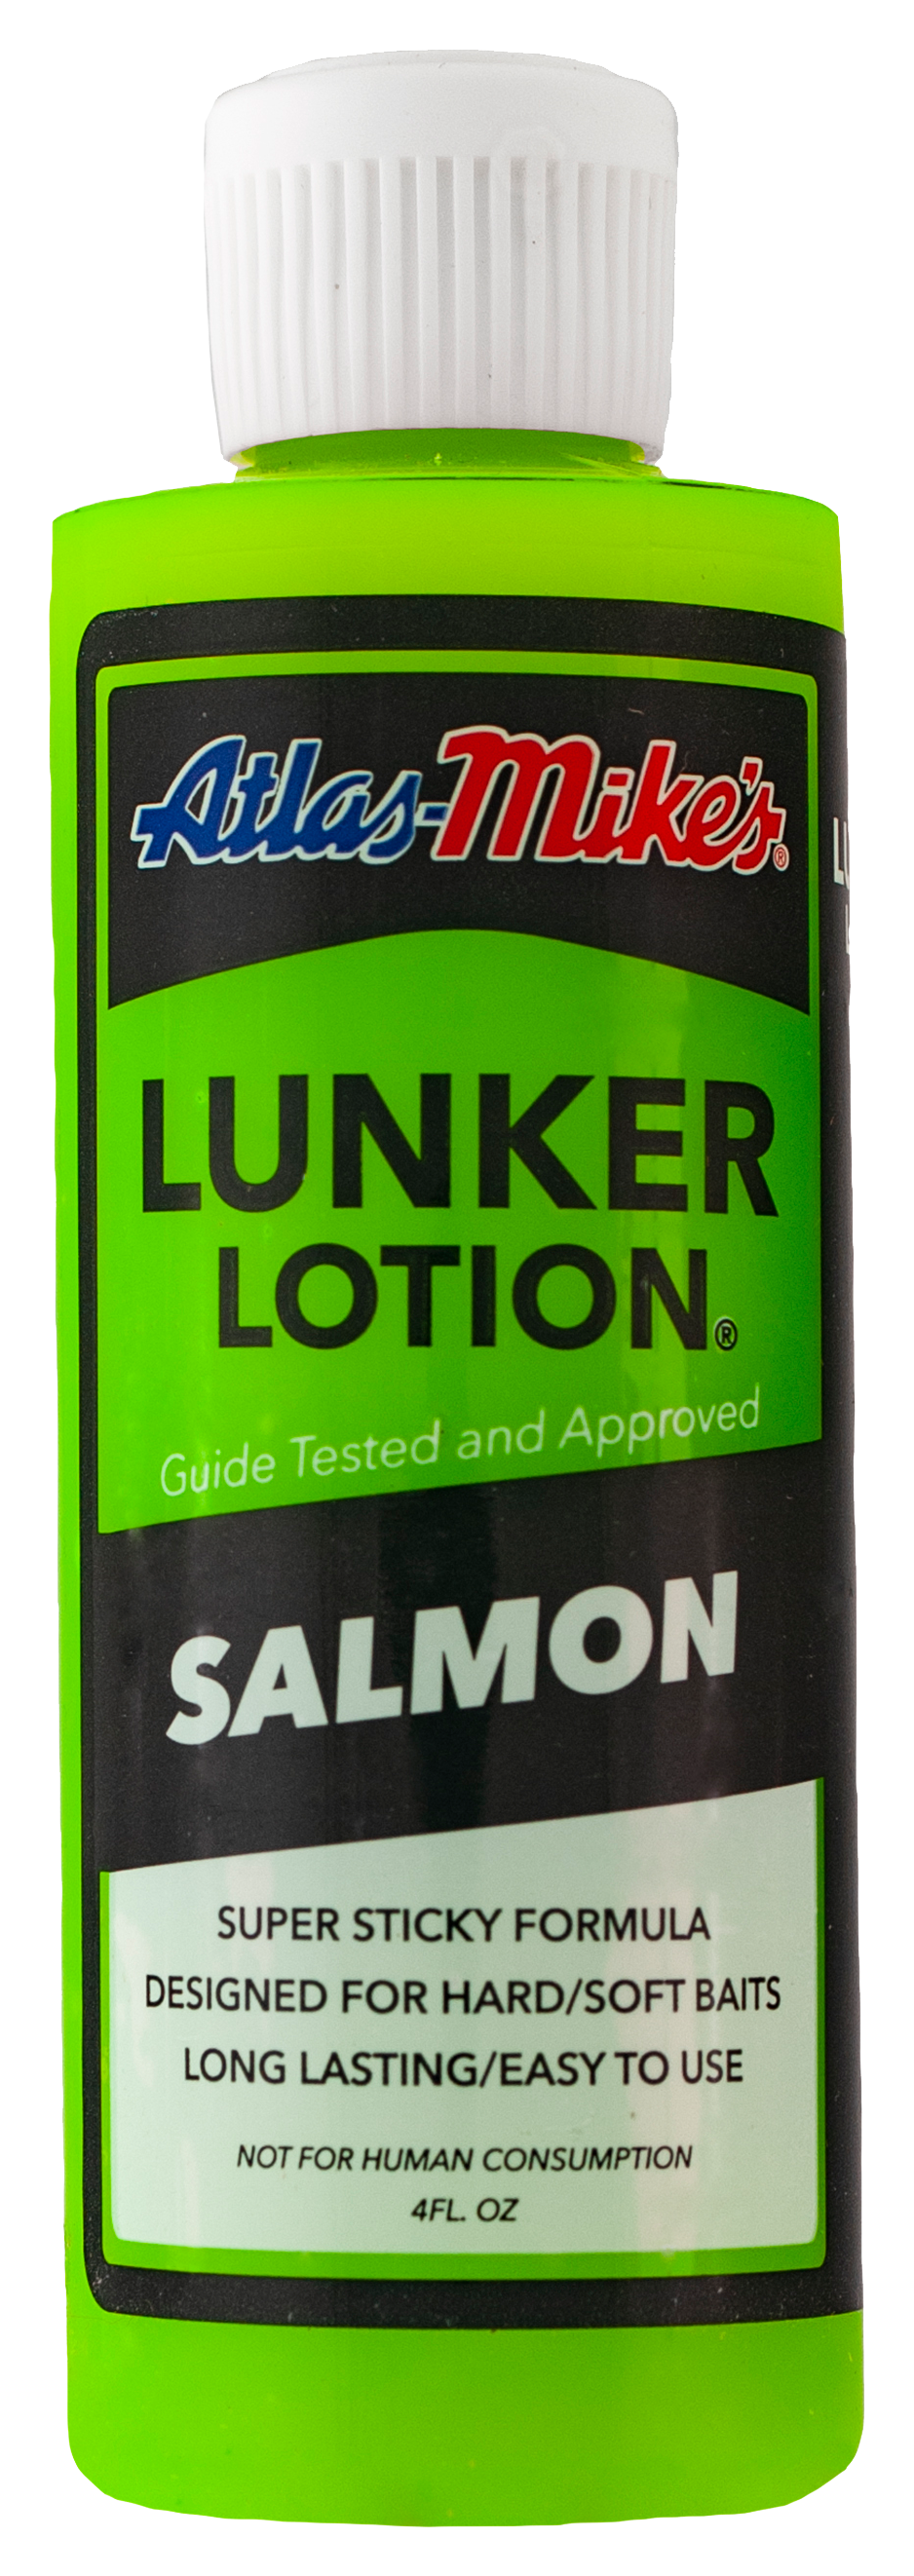 Mike's Glow Lunker Lotion - Salmon/Glow - Bait & Lures